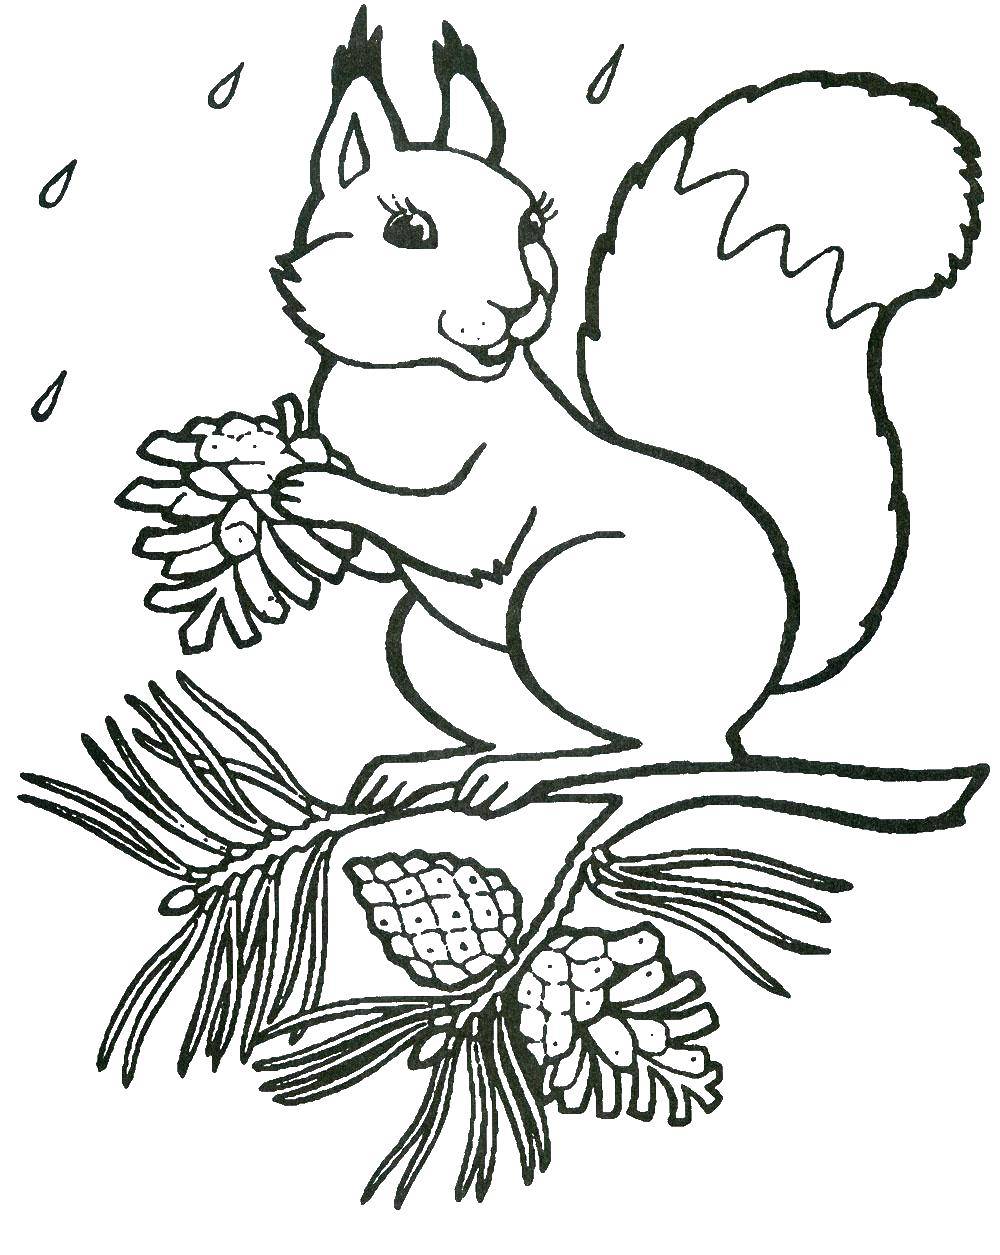 Coloring Squirrel with nuts. Category autumn. Tags:  protein, nuts.